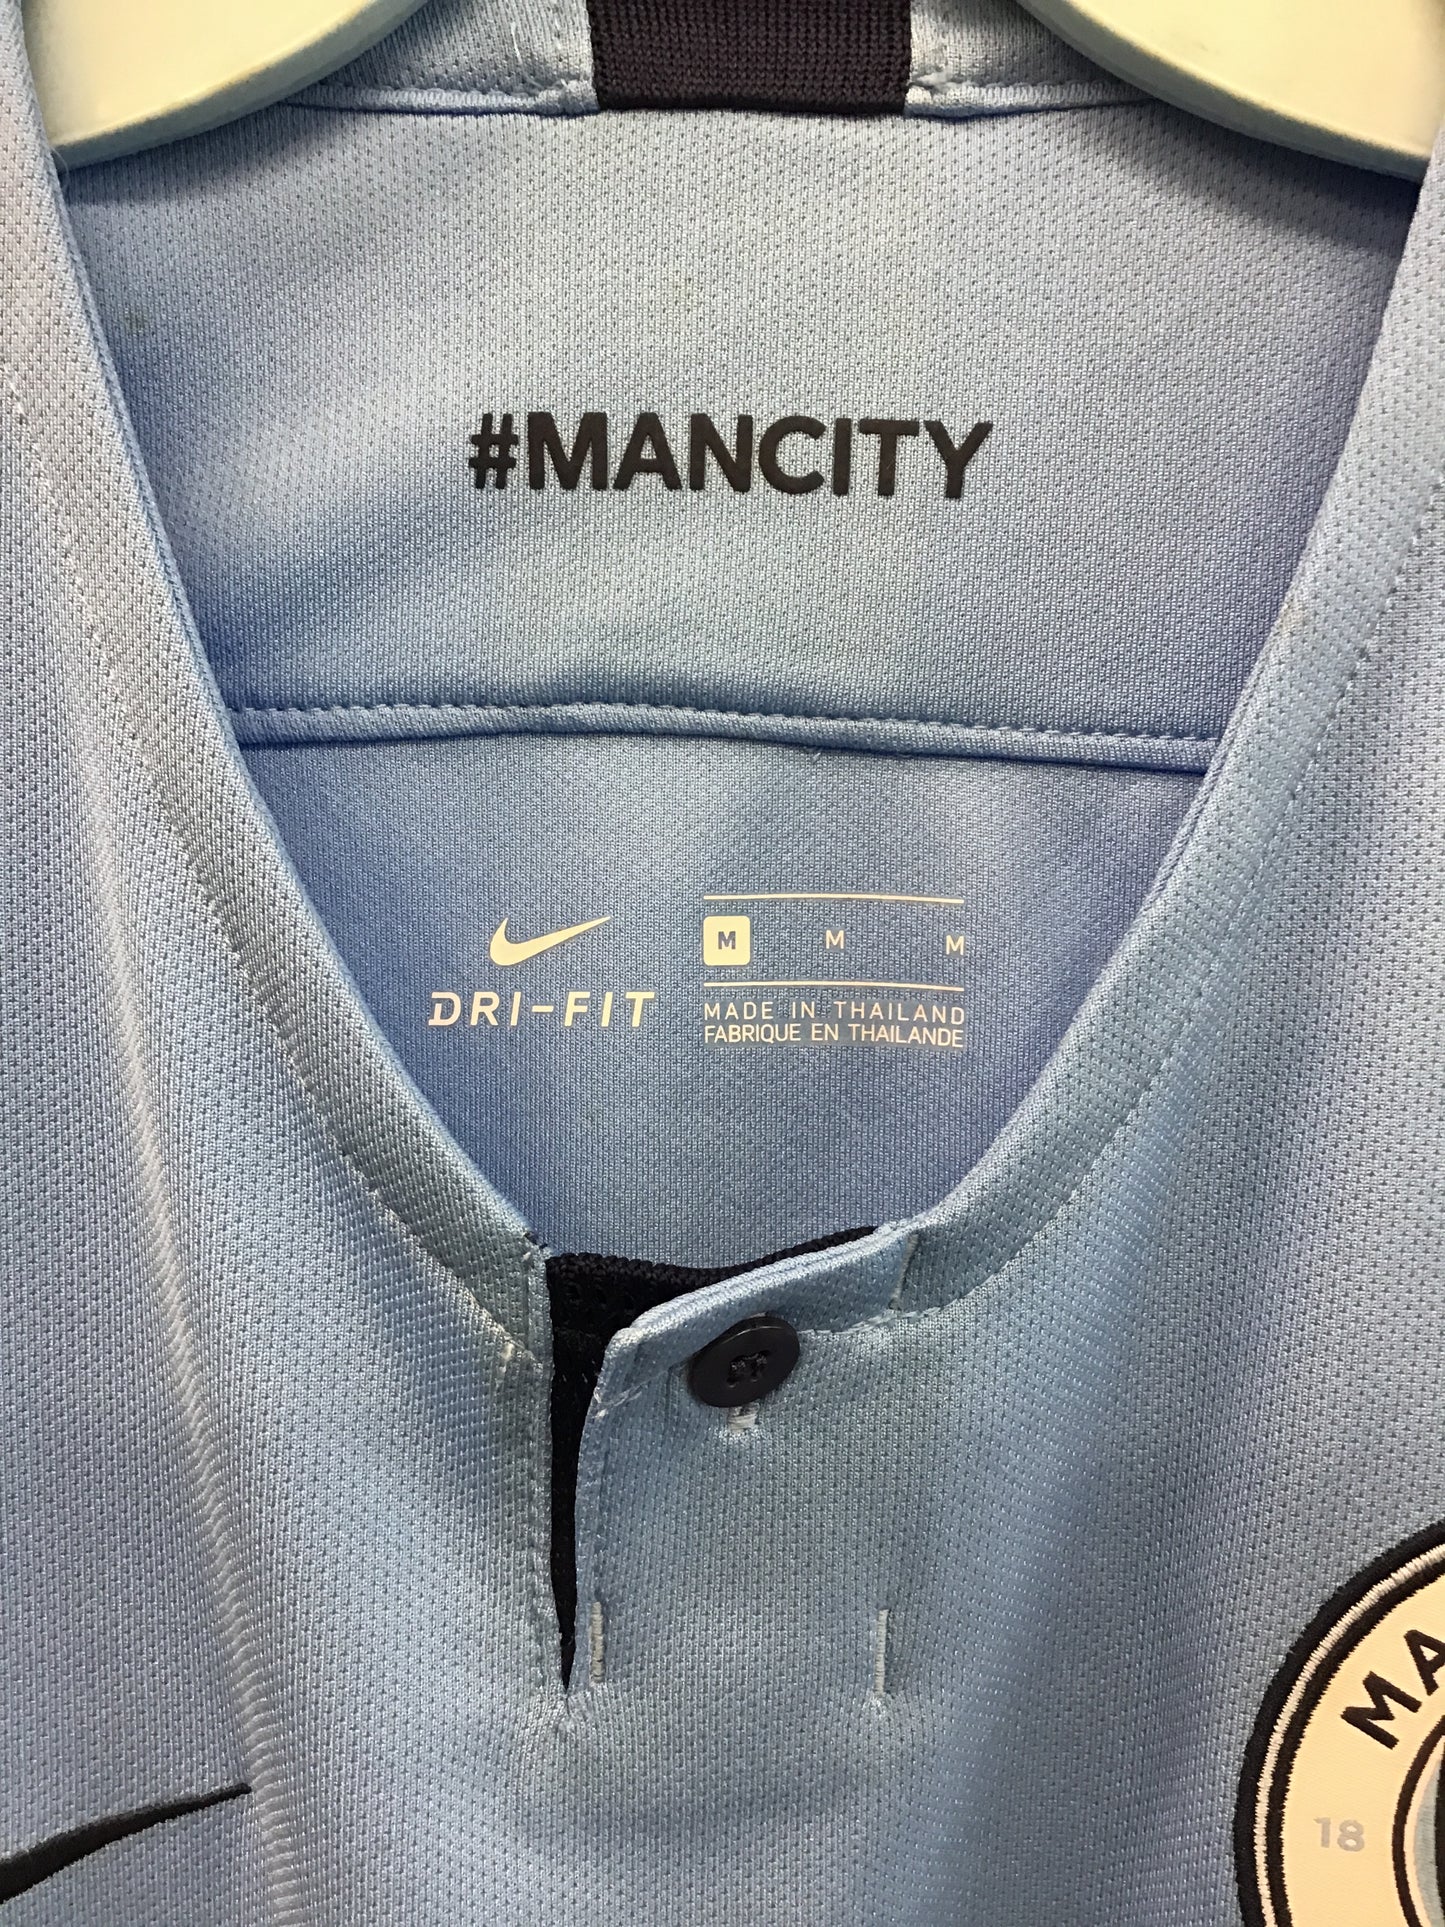 Nike Manchester City Authentic 2017 Jersey,  Size M